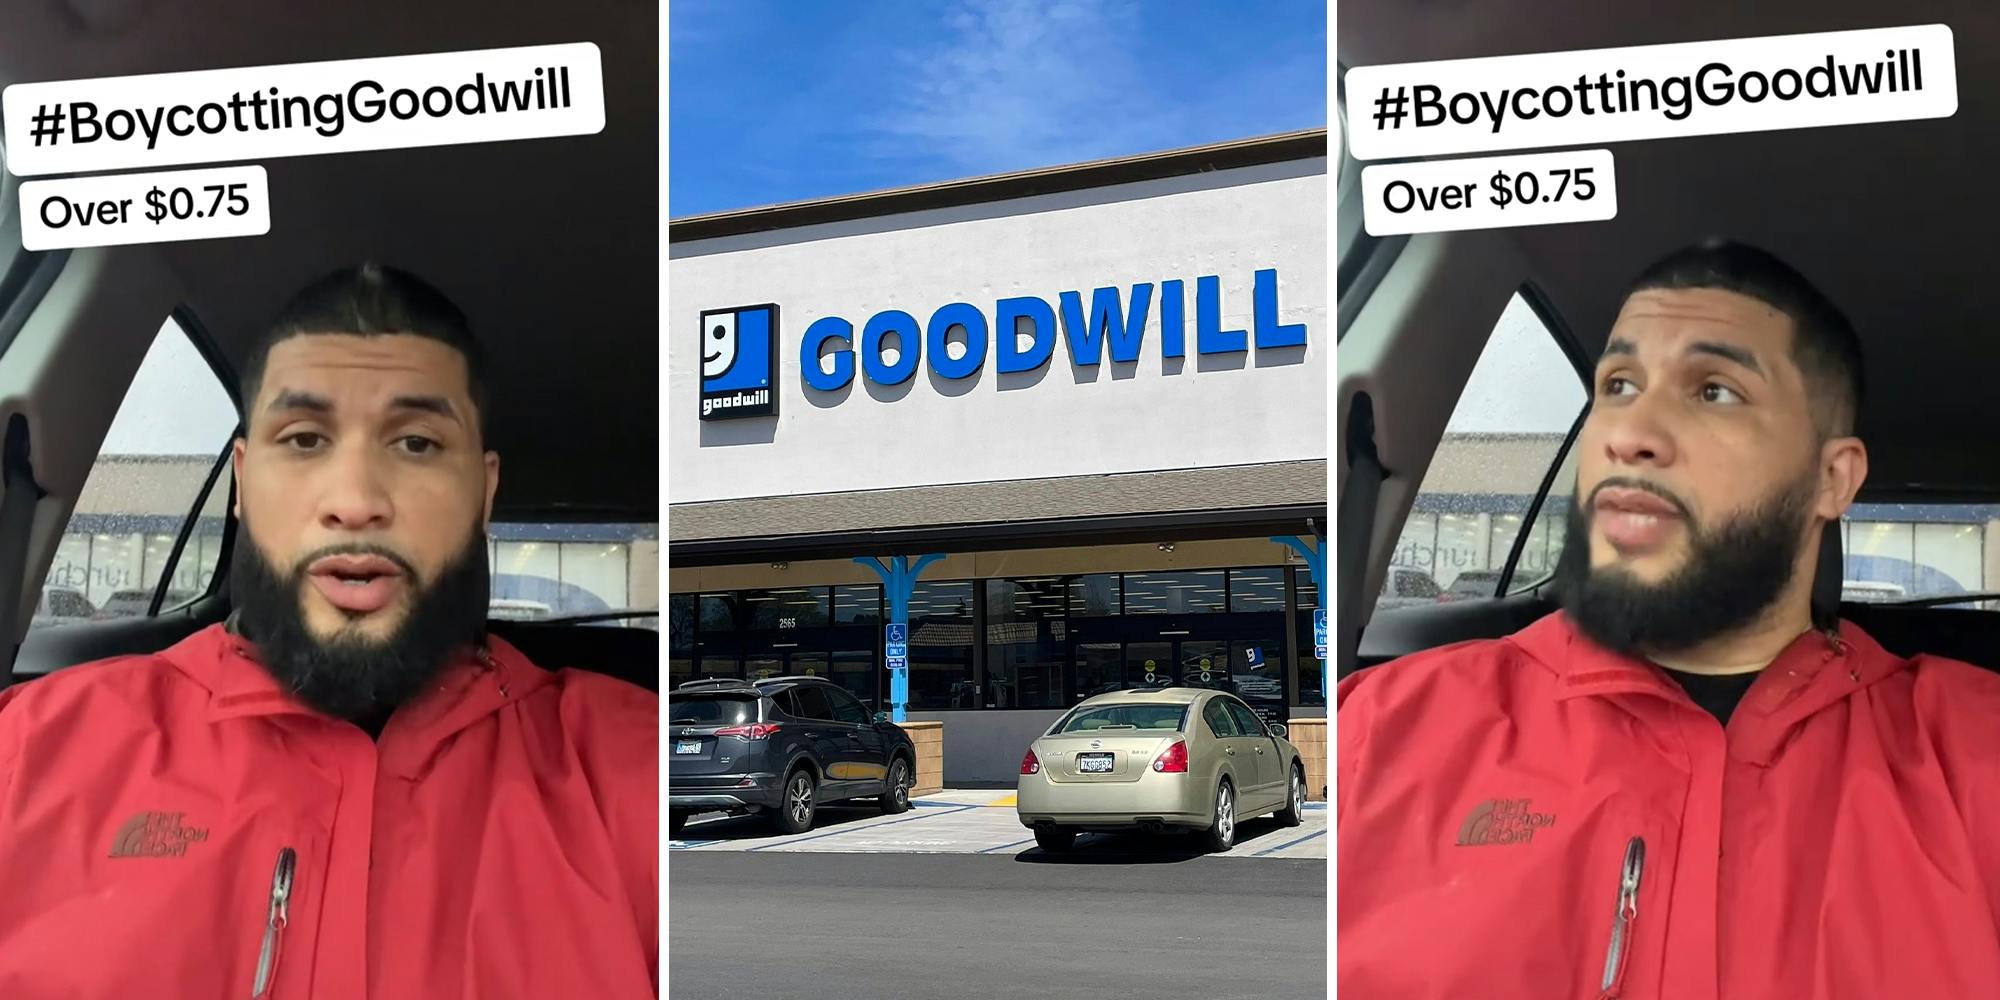 Goodwill customer blasts manager for turning away customer who’s 70 cents short